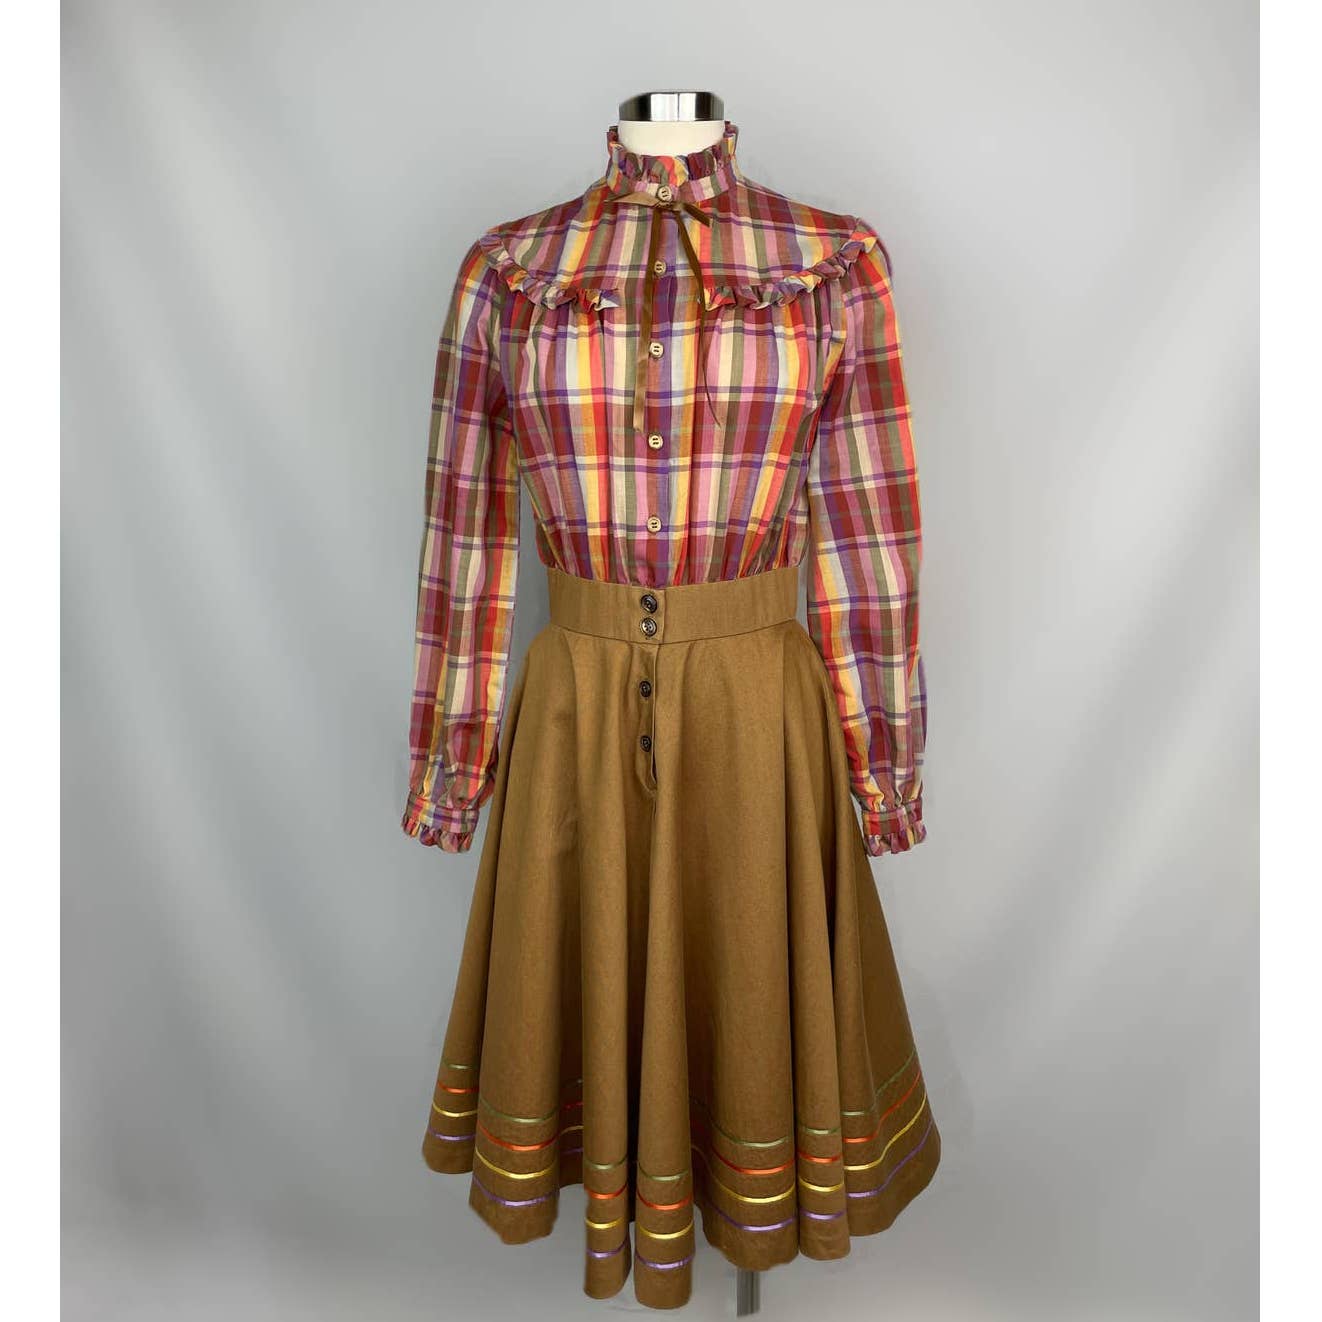 Vintage 1980s Dress Plaid Ruffle Pink Brown Full Skirt Small High Collar A1008